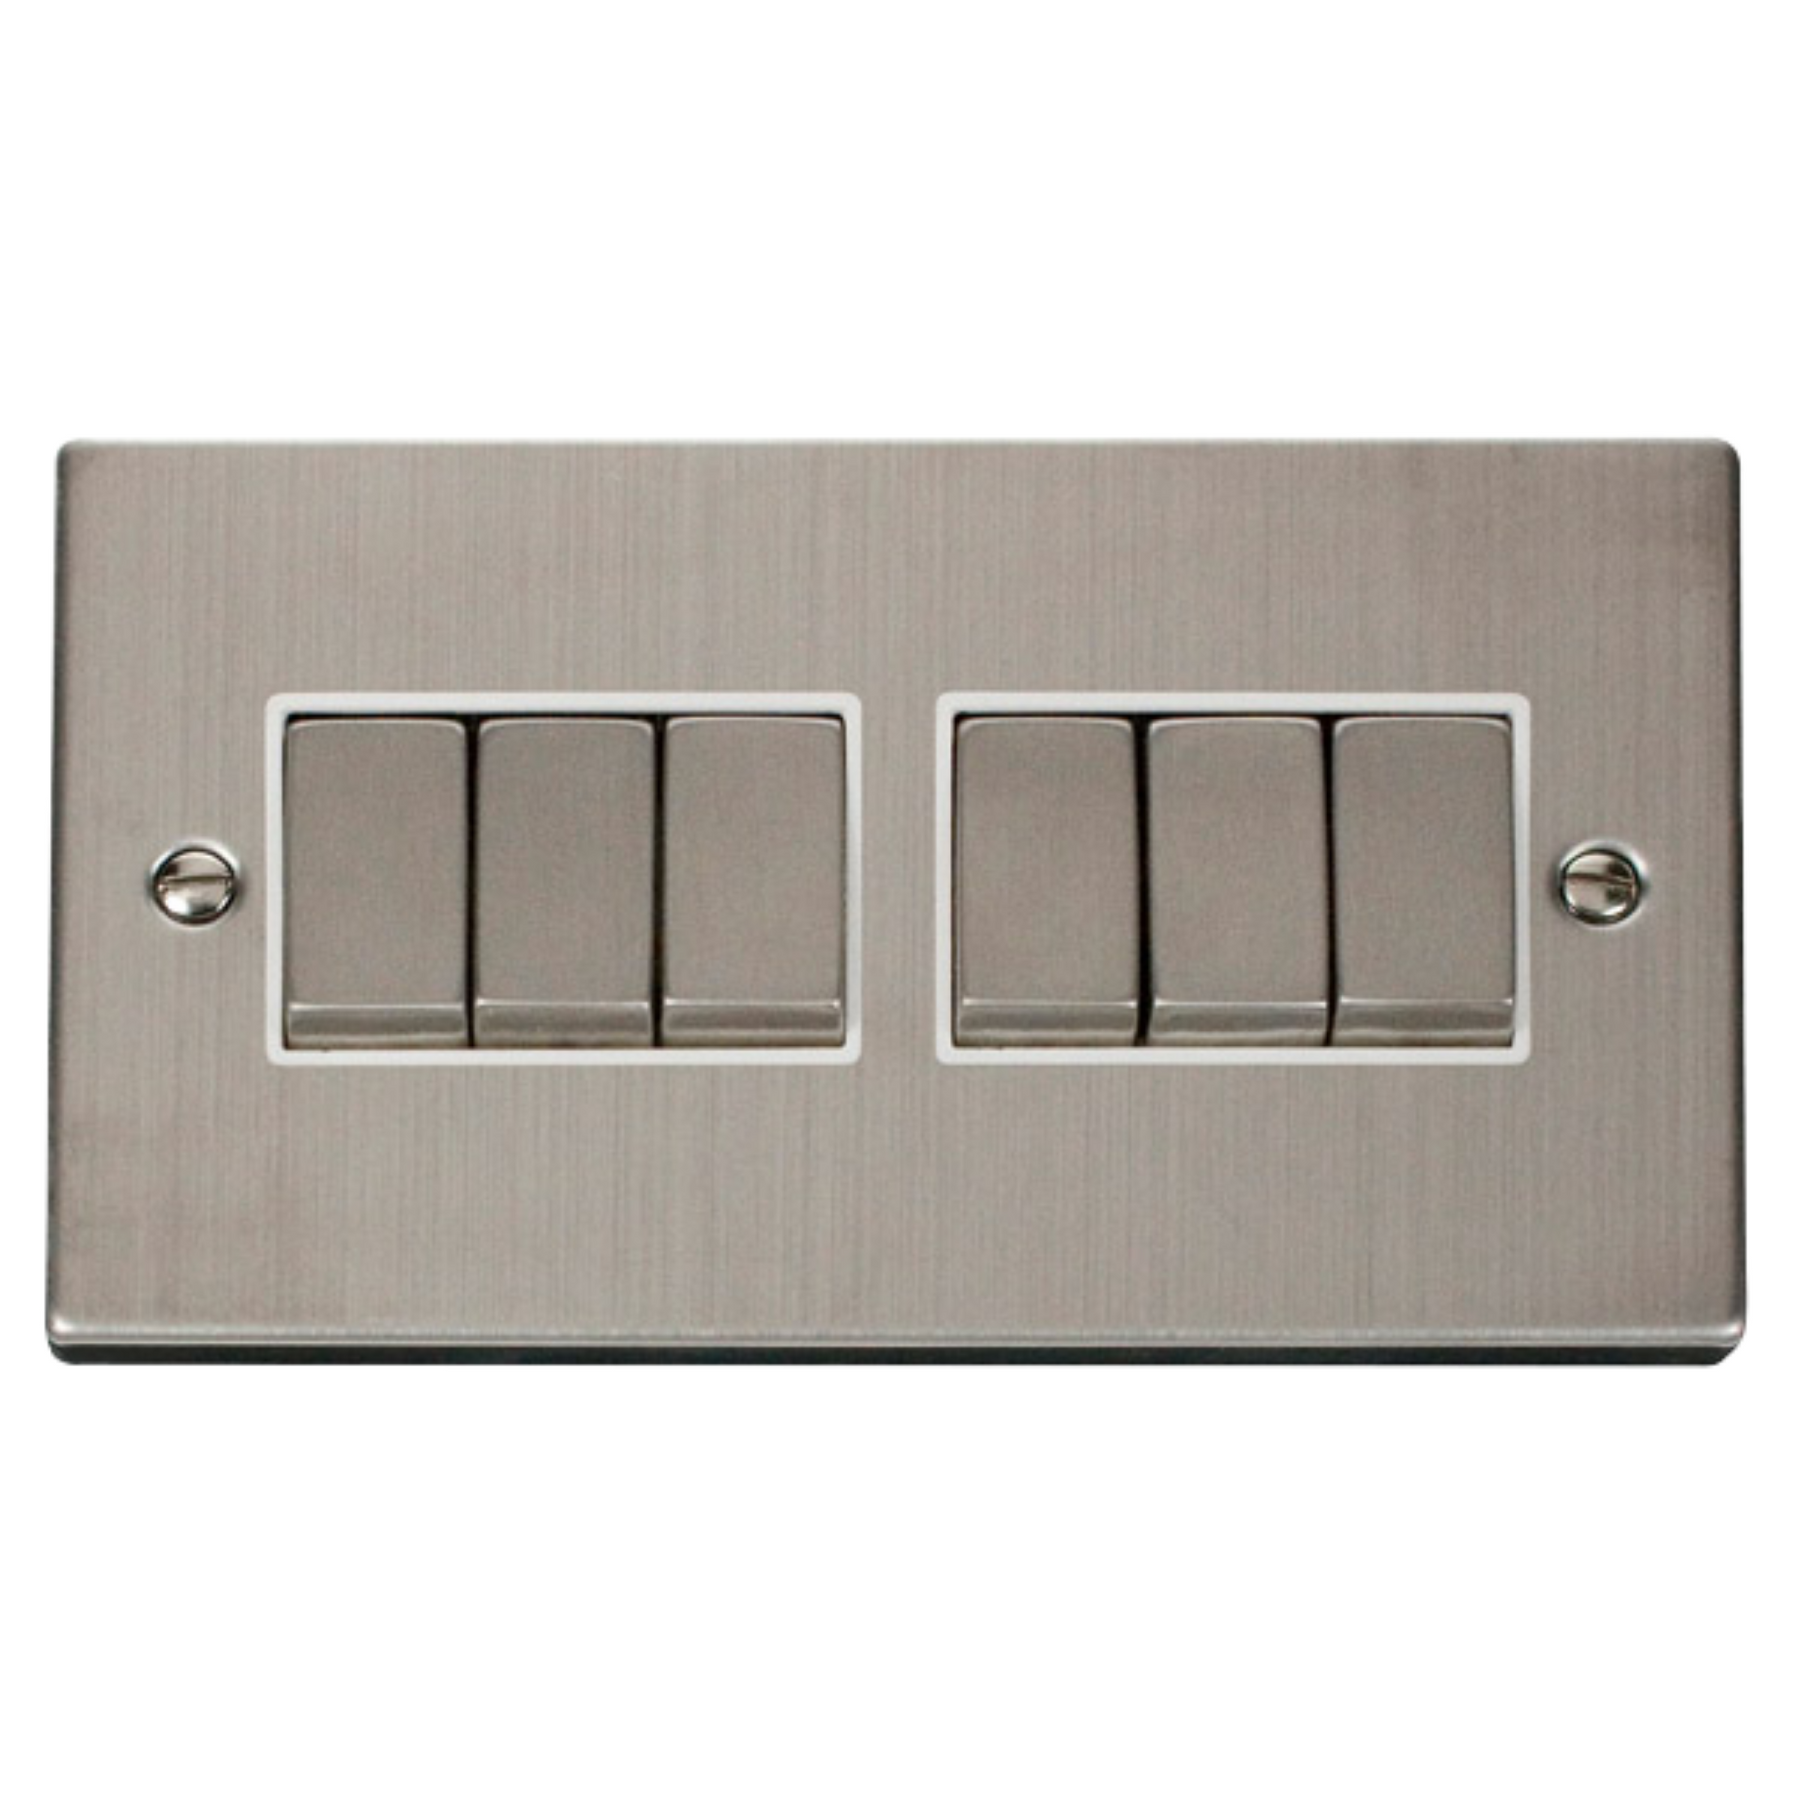 Z-Wave Smart Dimmer Switch in Stainless Steel